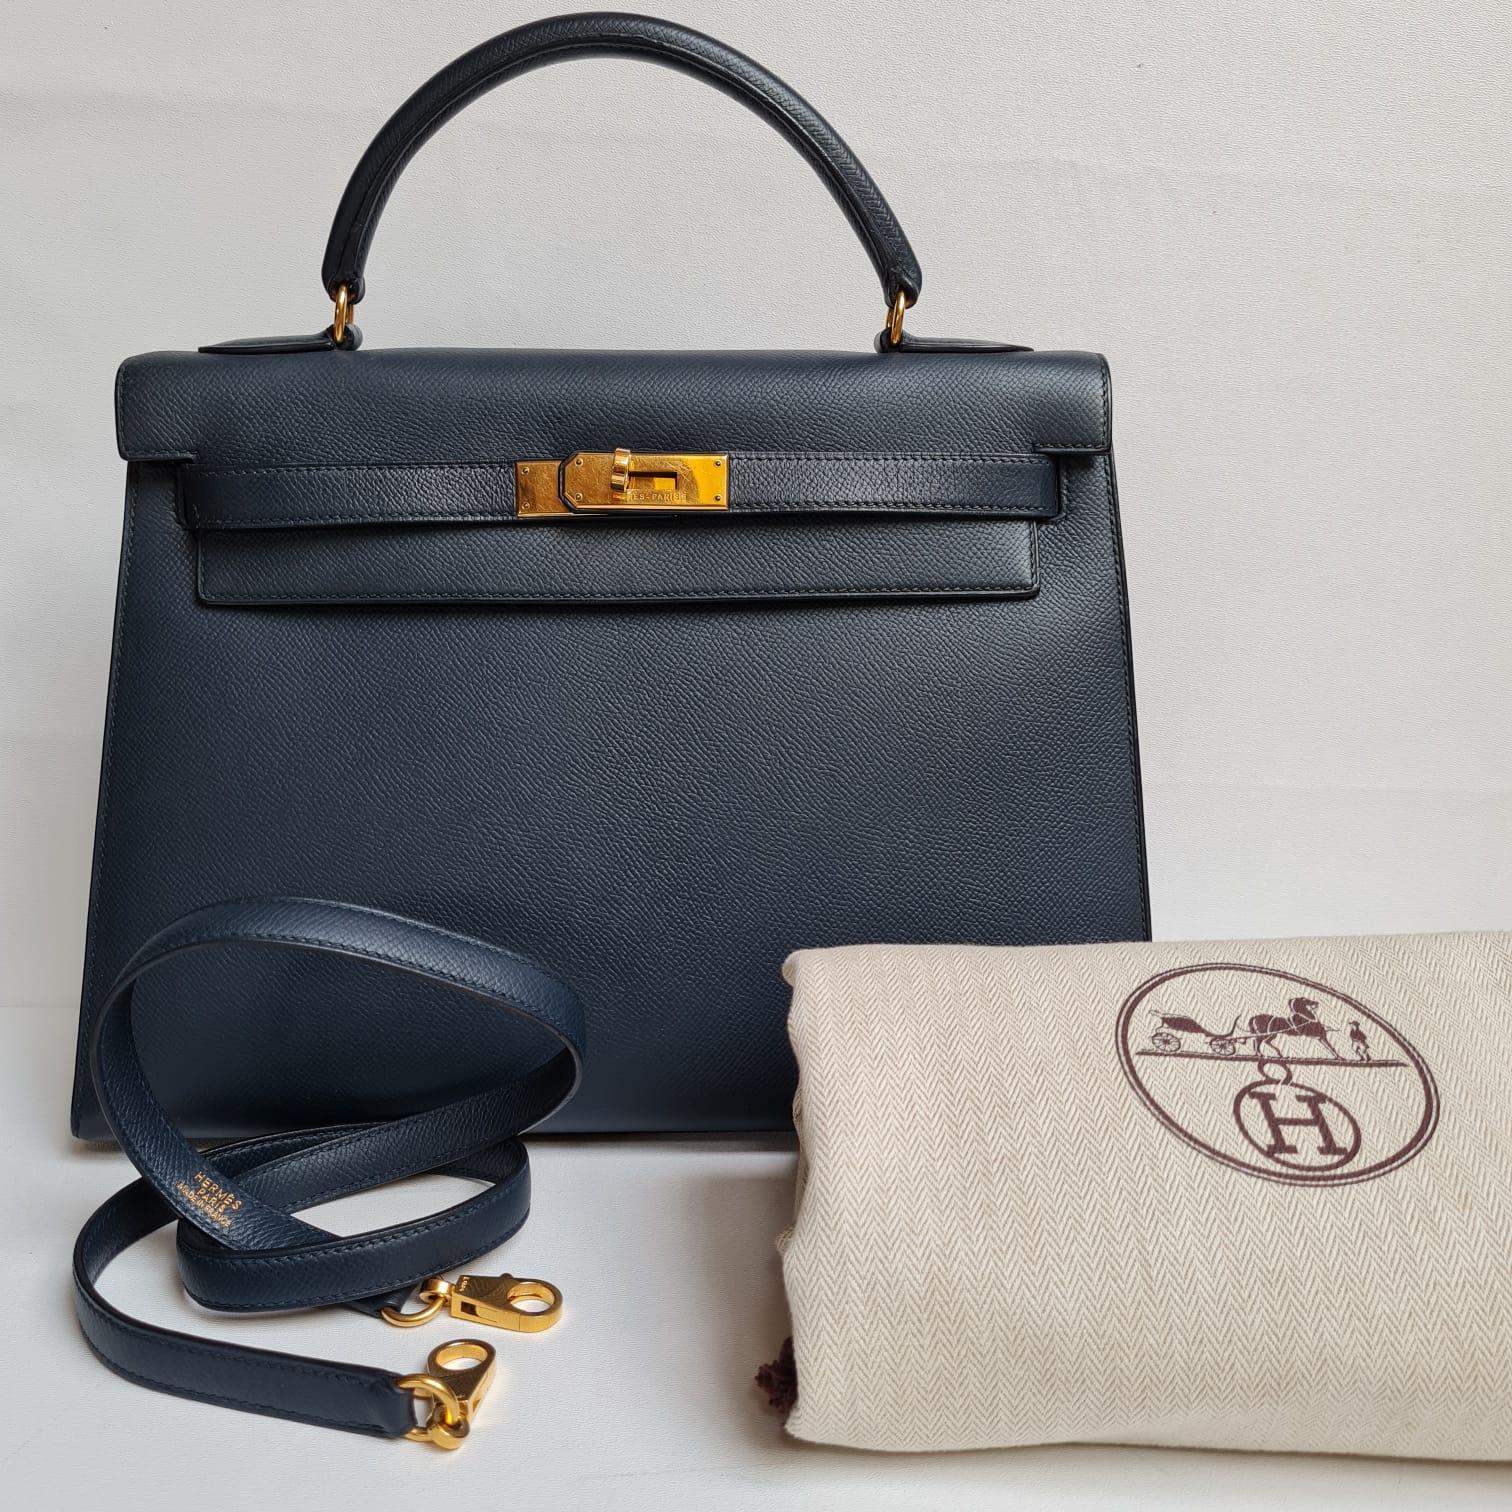 Classic 1996 Kelly 32 Bag in Navy Epsom leather. Beautiful condition, only minor scratches due to wear and some tarnishing on the bottom feet hardware. Item is missing its clochette. Only comes with it strap. Overall in great condition as pictured. 